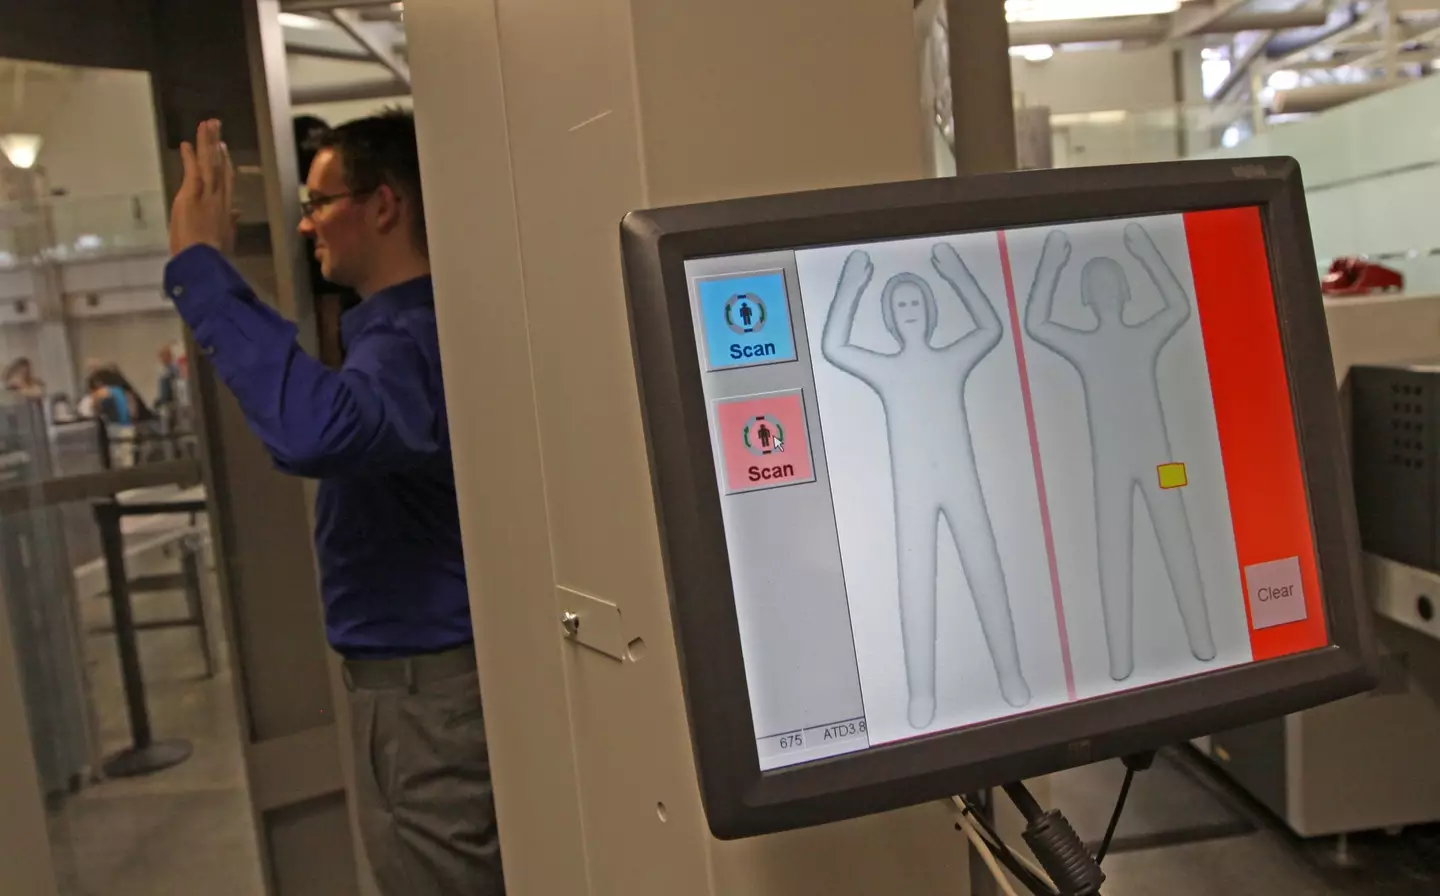 Airport scanners are now more generic. (Bruce Bisping/Star Tribune via Getty Images)